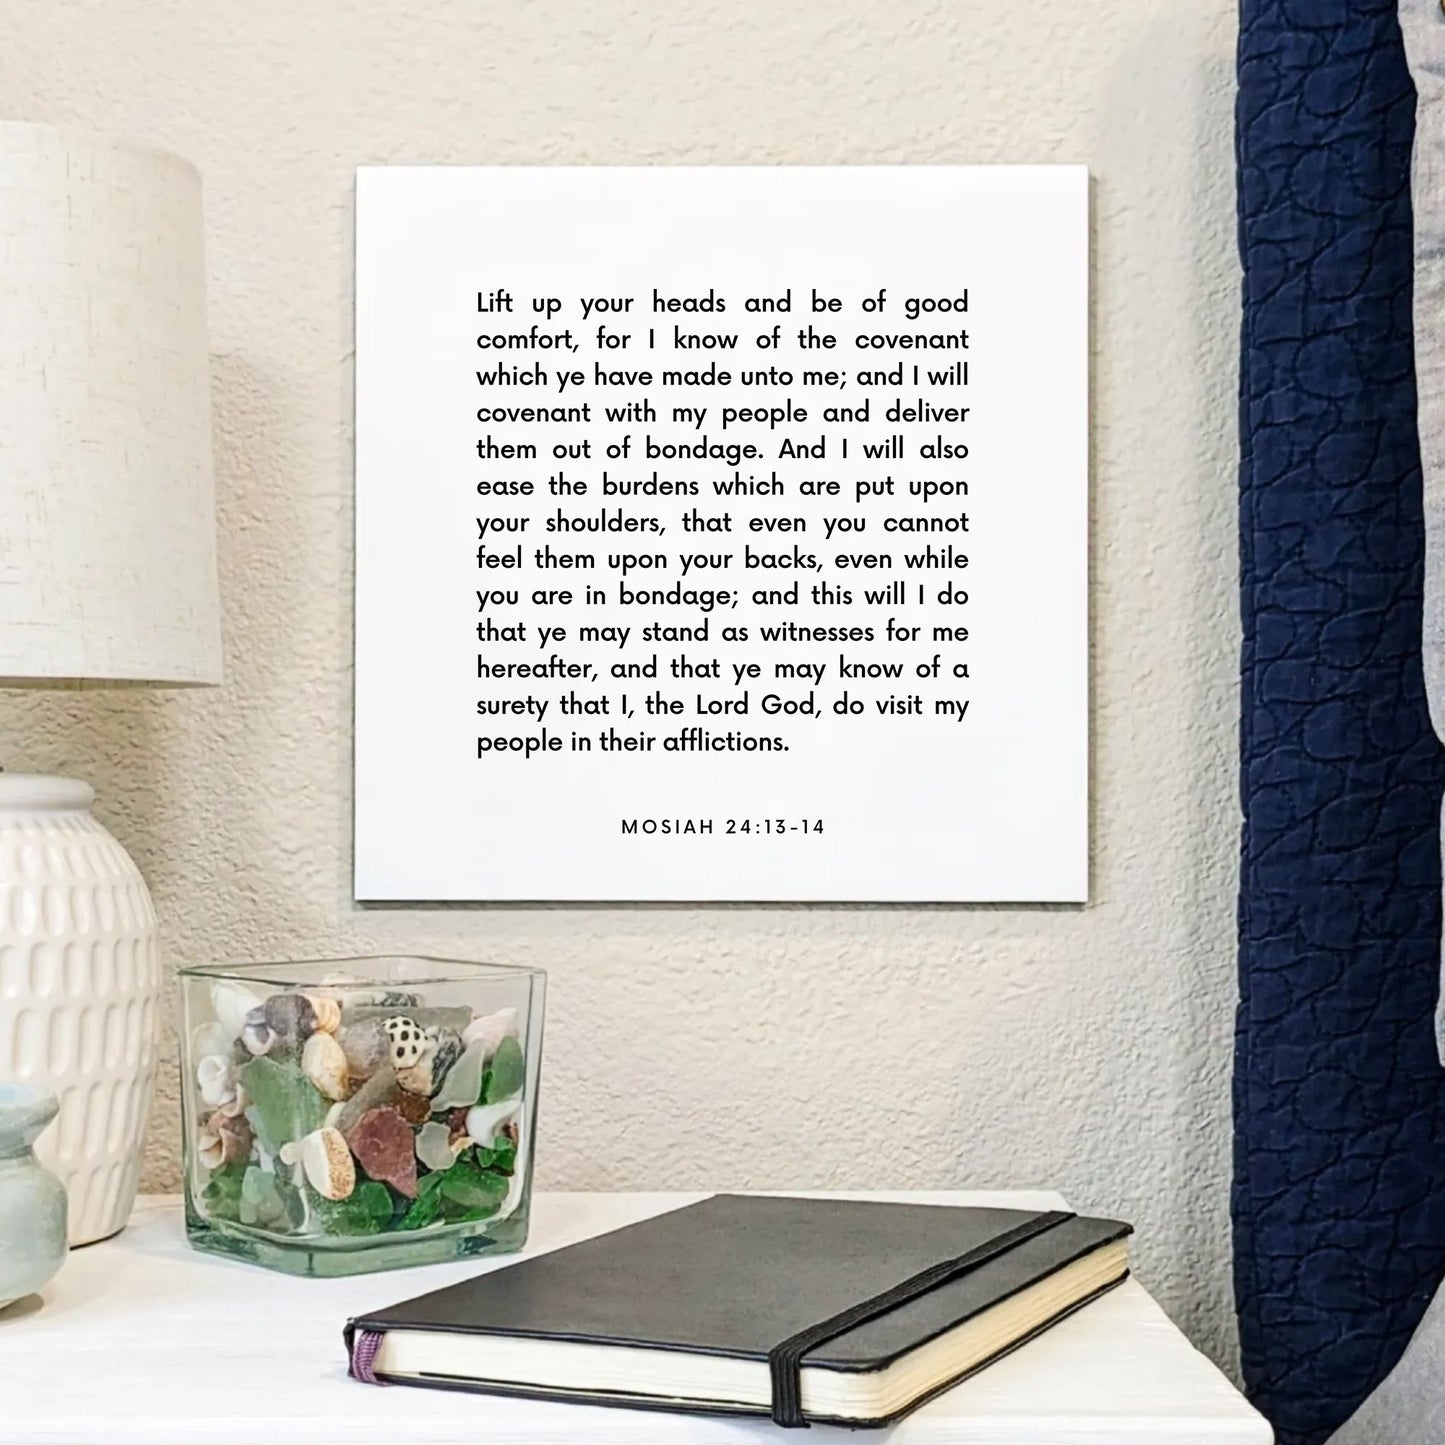 Bedside mouting of the scripture tile for Mosiah 24:13-14 - "Lift up your heads and be of good comfort"